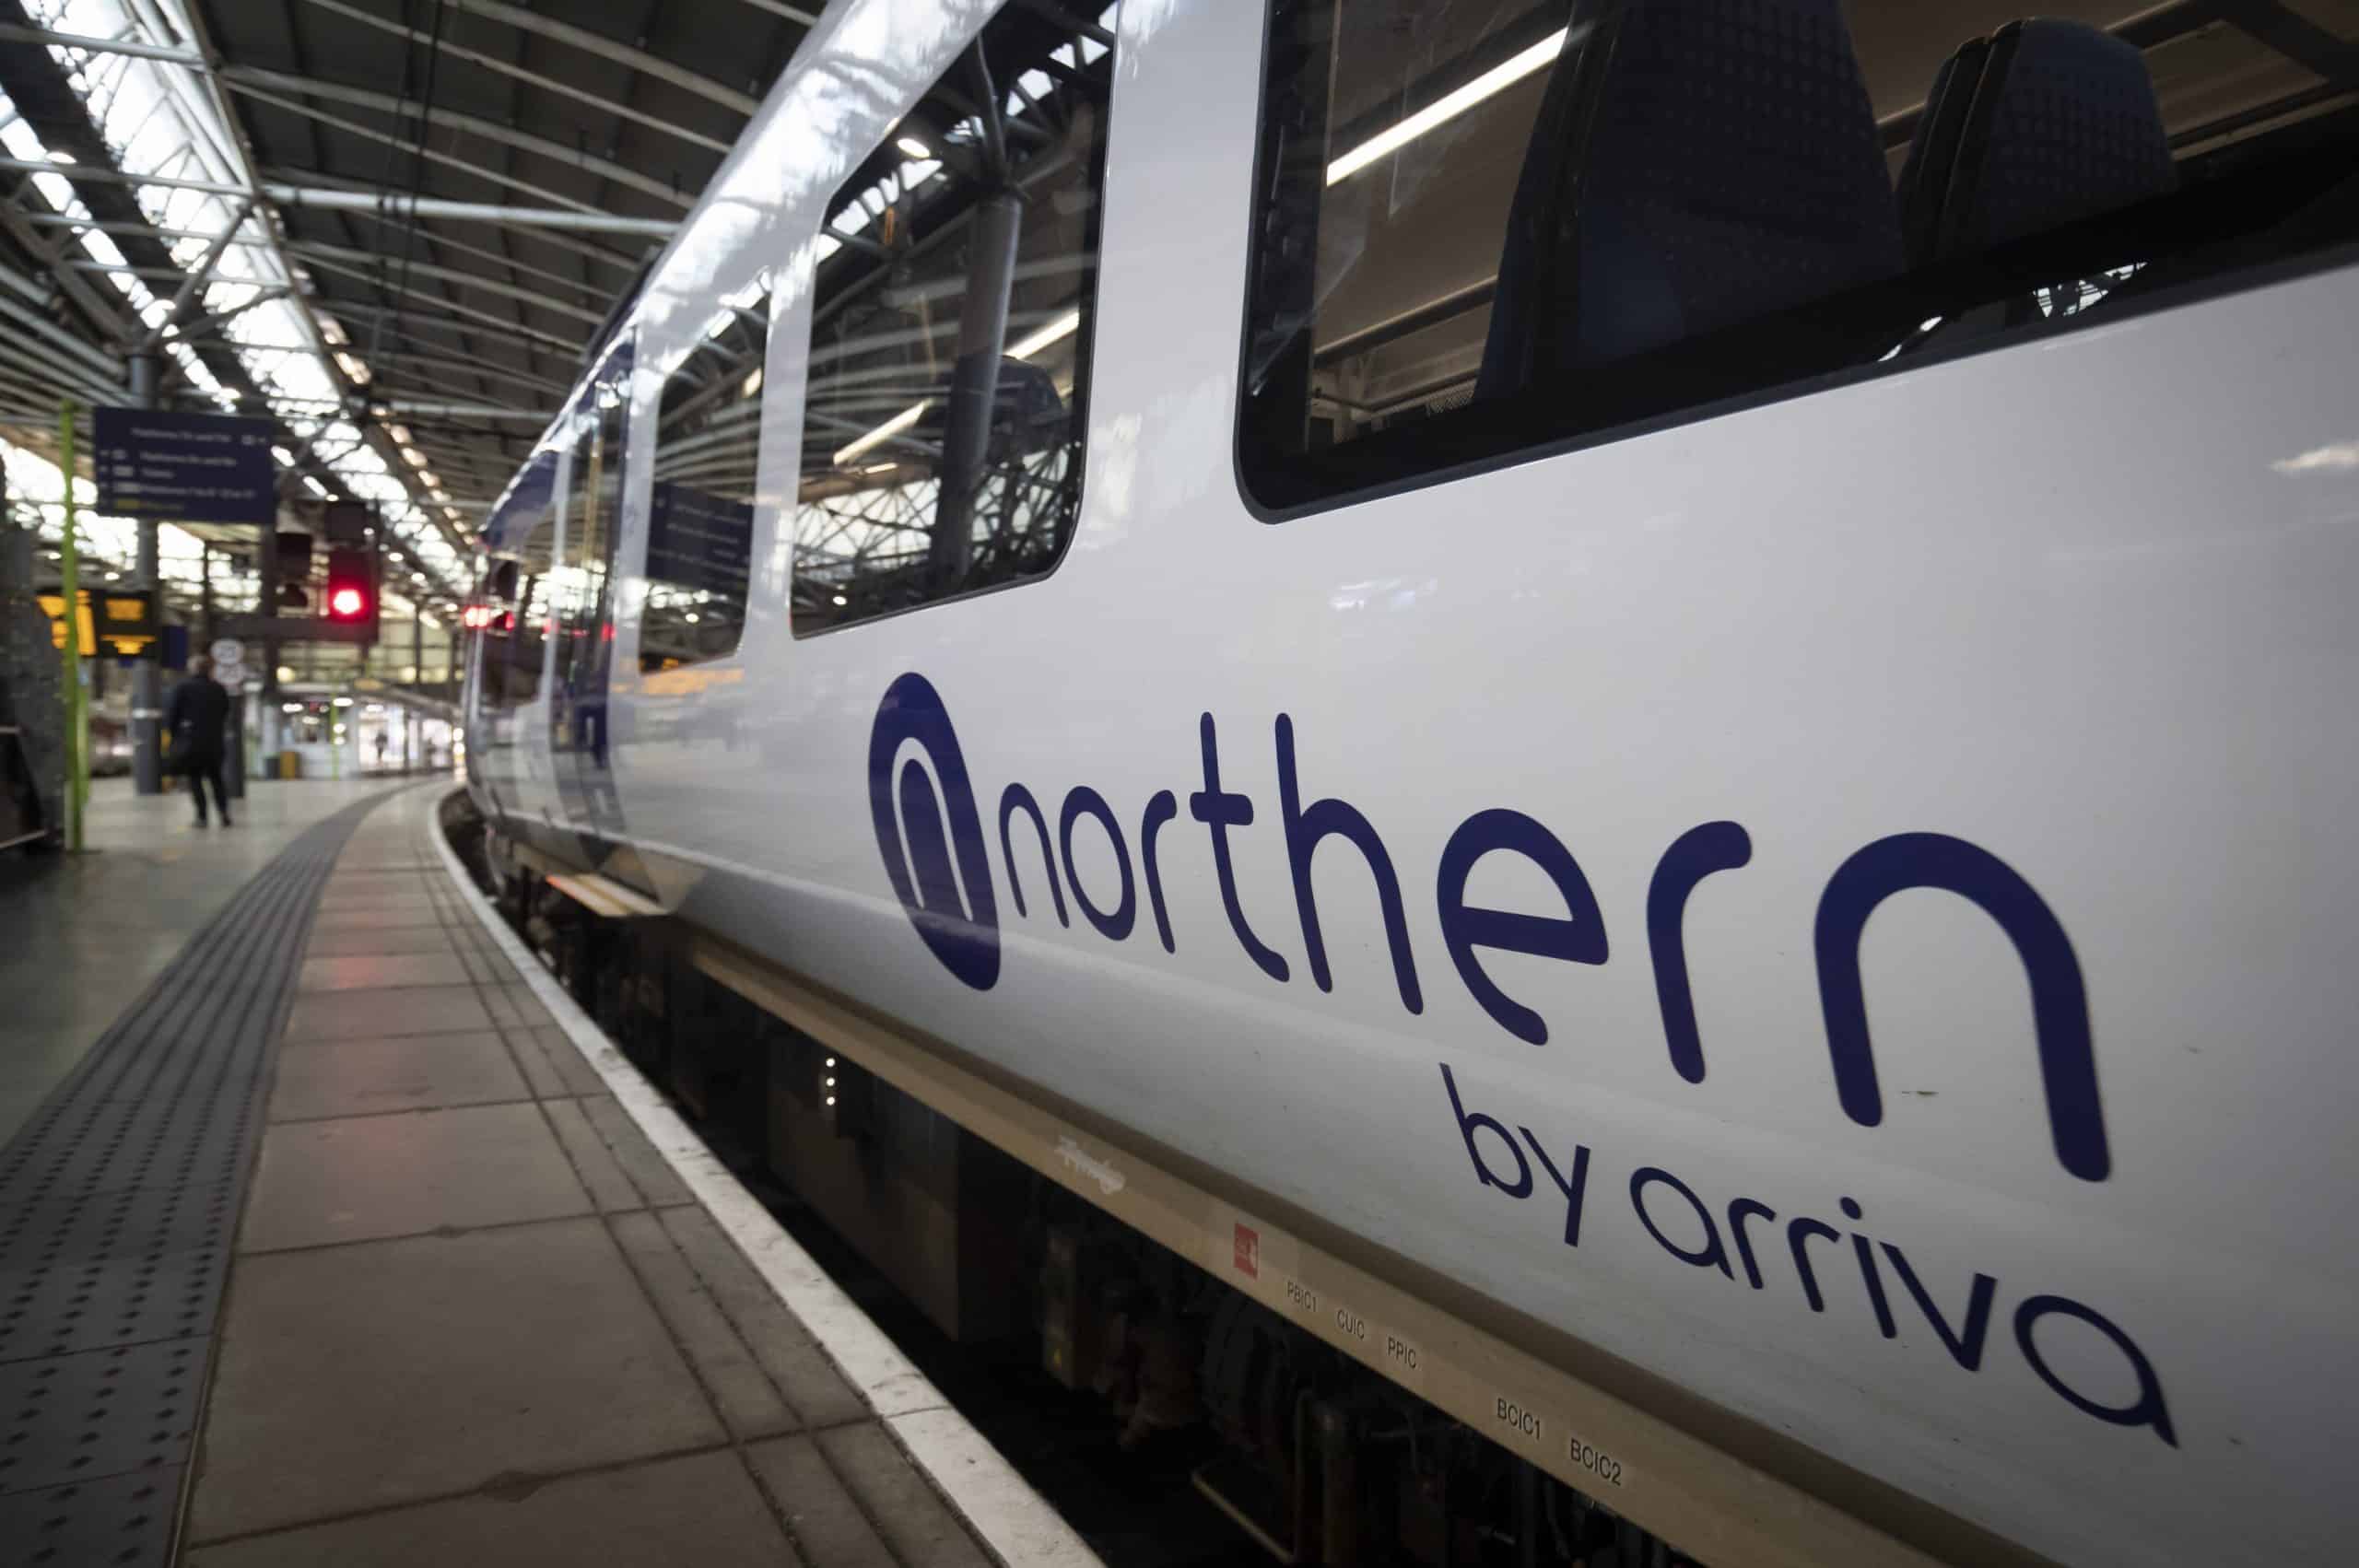 Last day before train operator Northern hits buffers